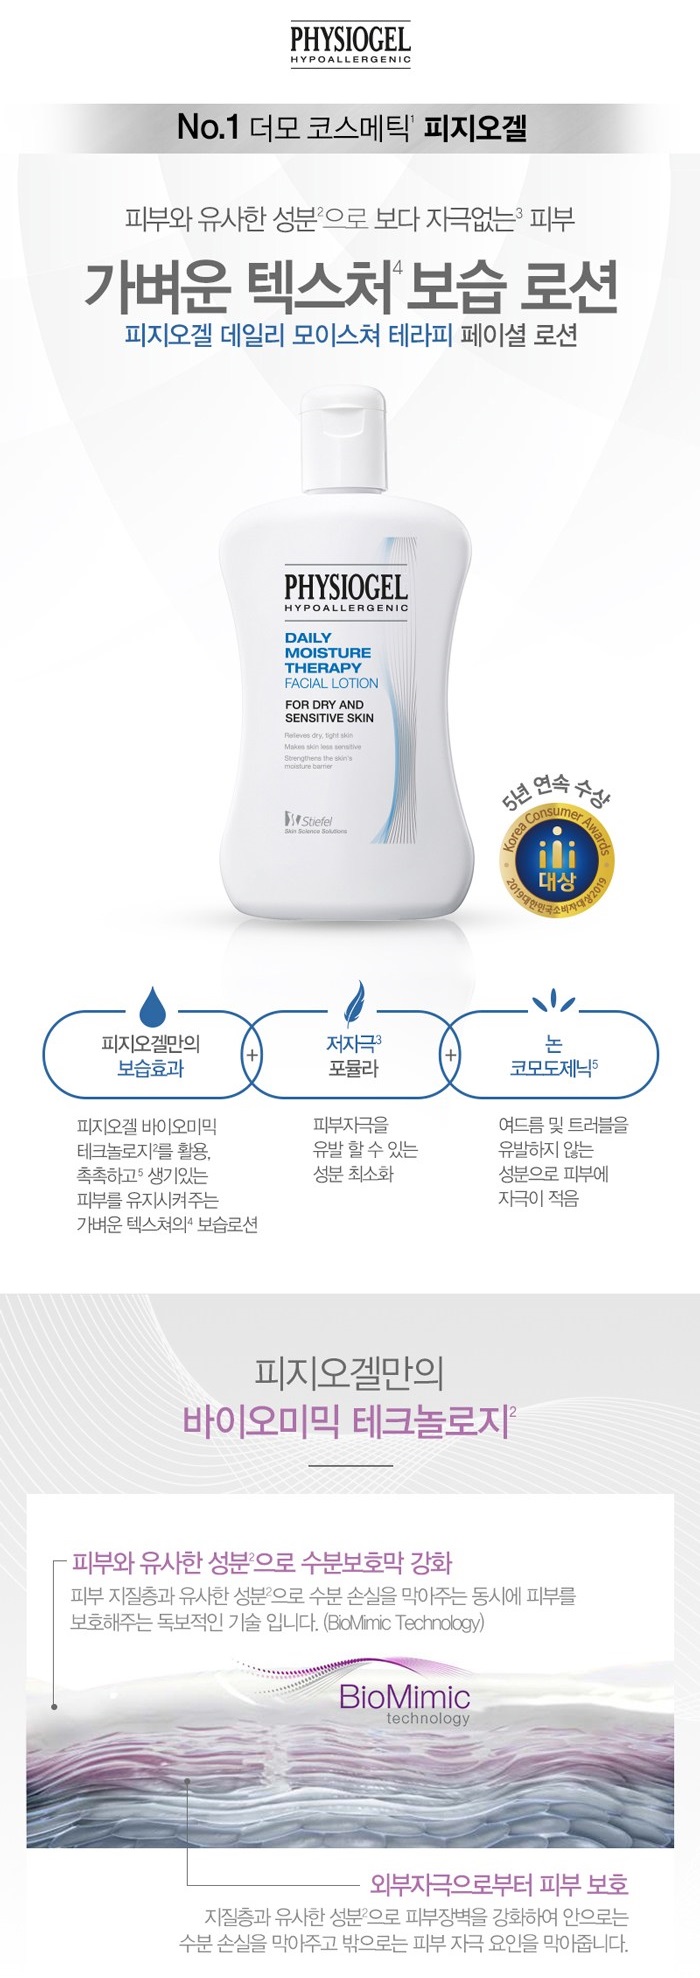 PHYSIOGEL - Daily Moisture Therapy Facial Lotion 200ml